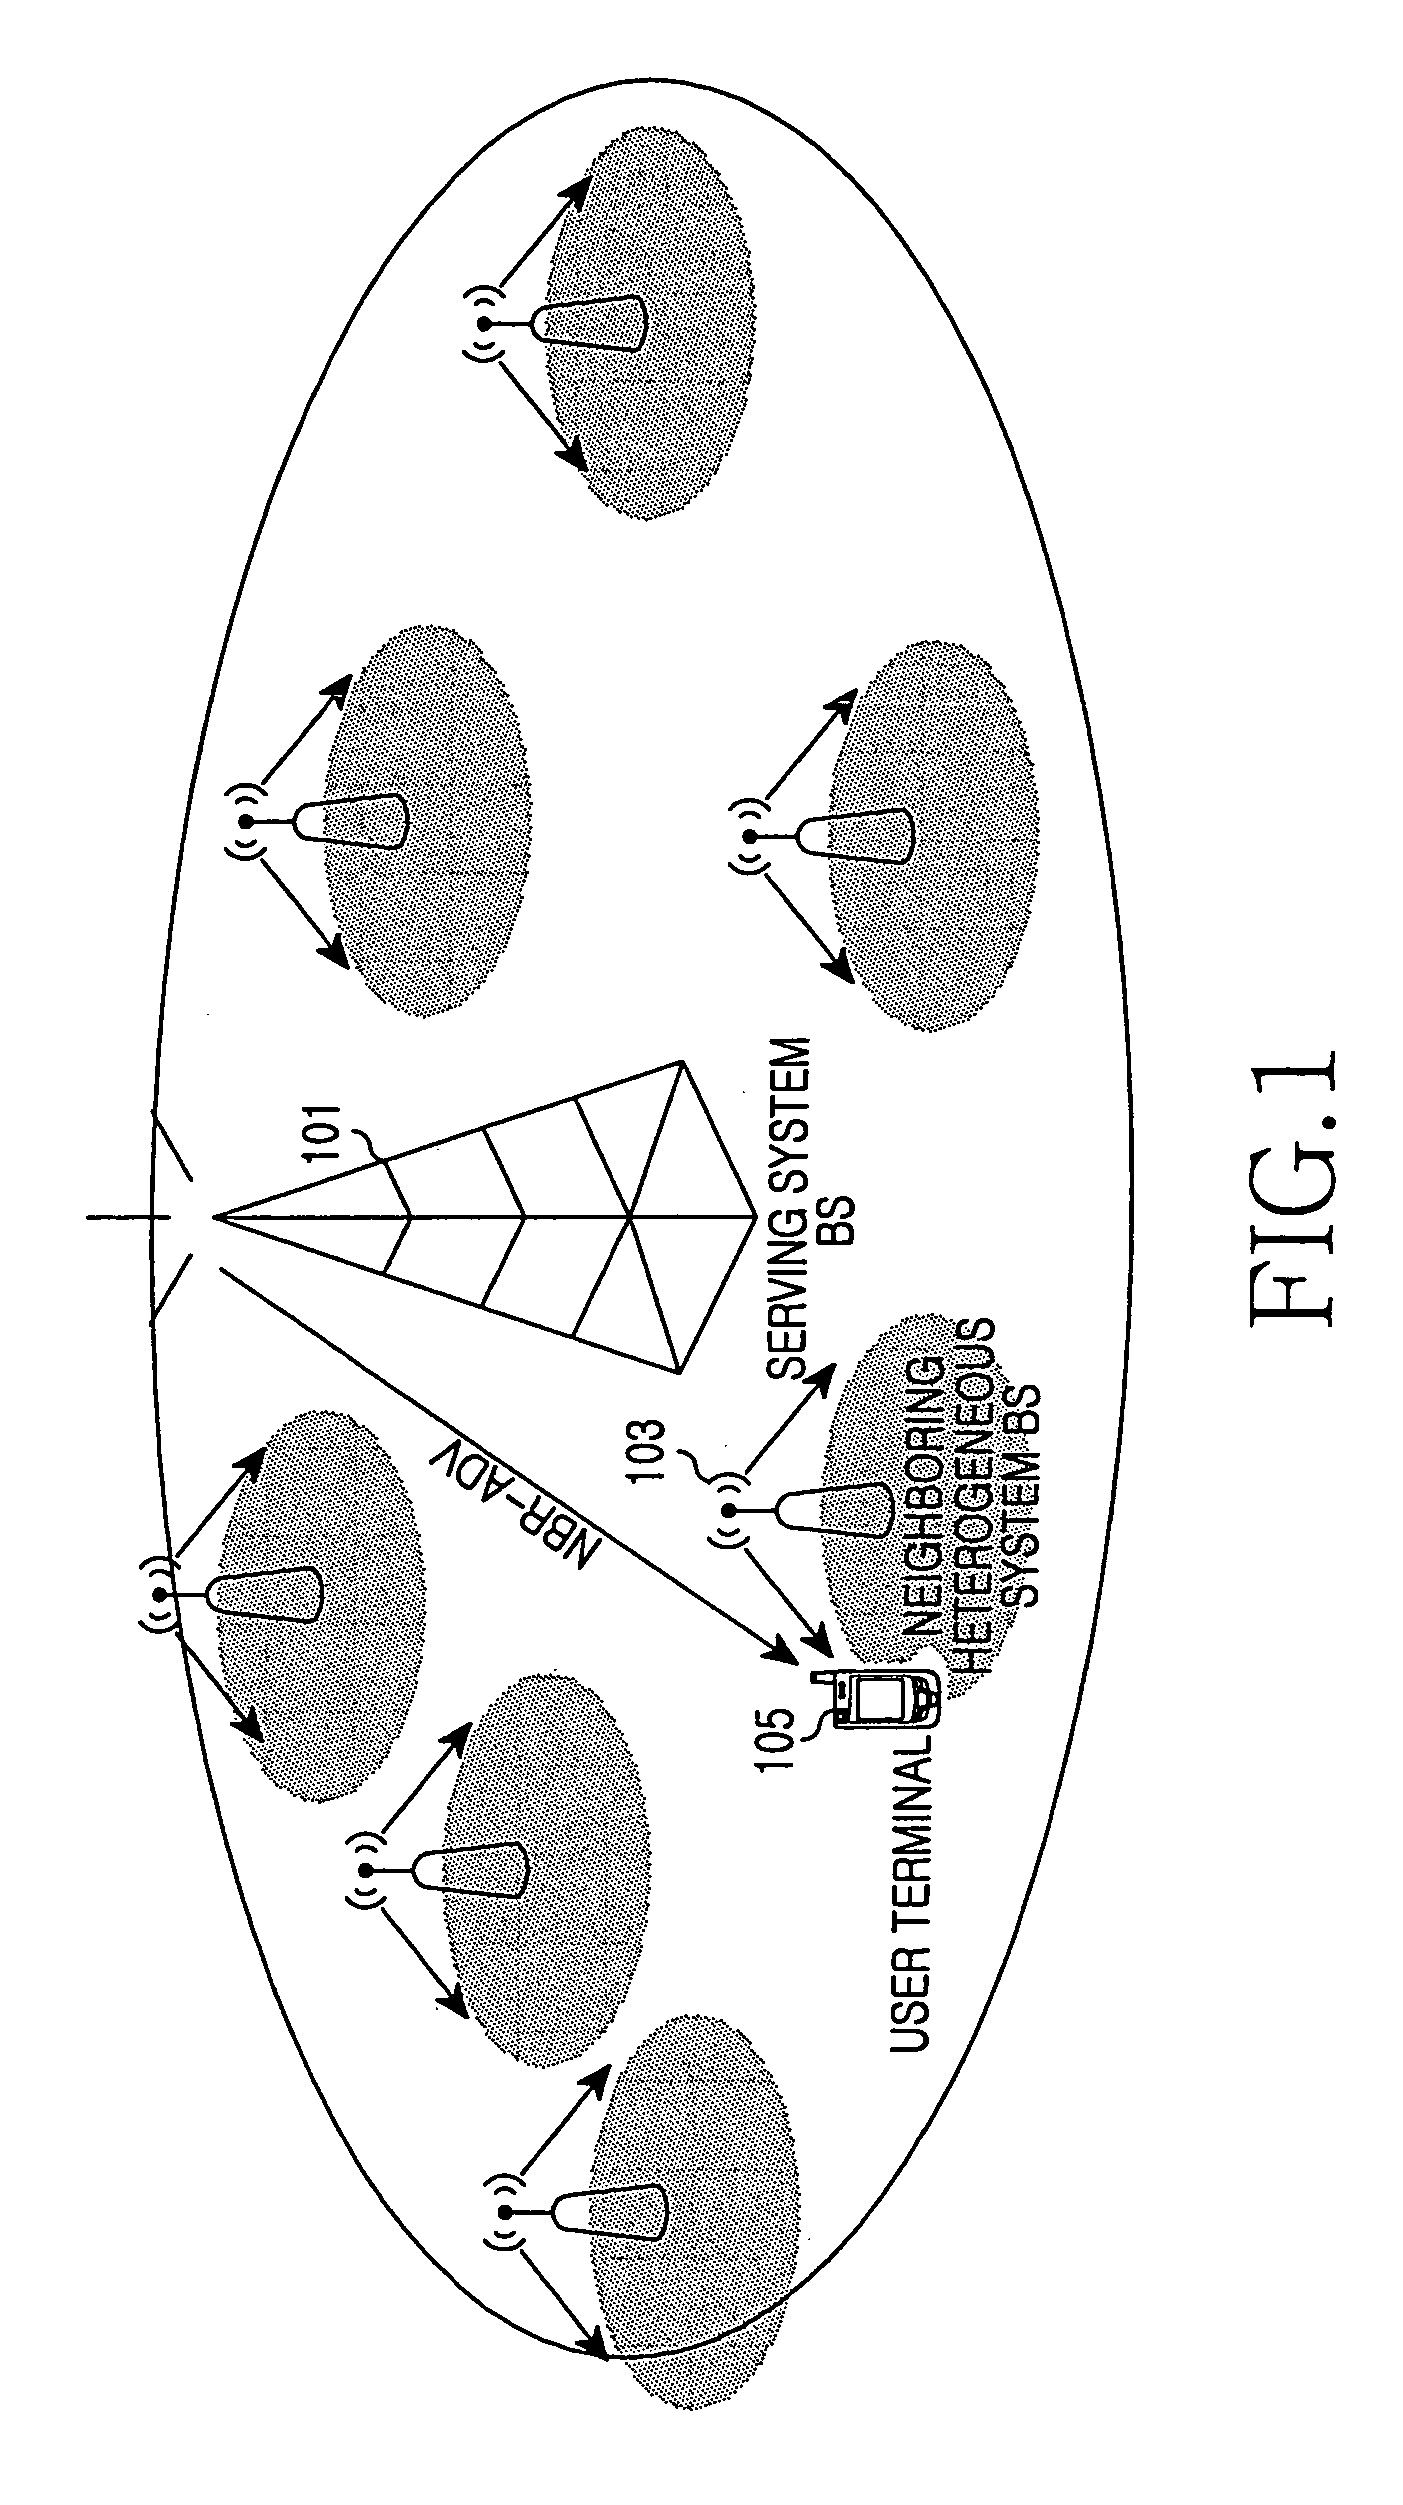 Apparatus and method for transmitting/receiving message for handover to heterogeneous system in broadband wireless access